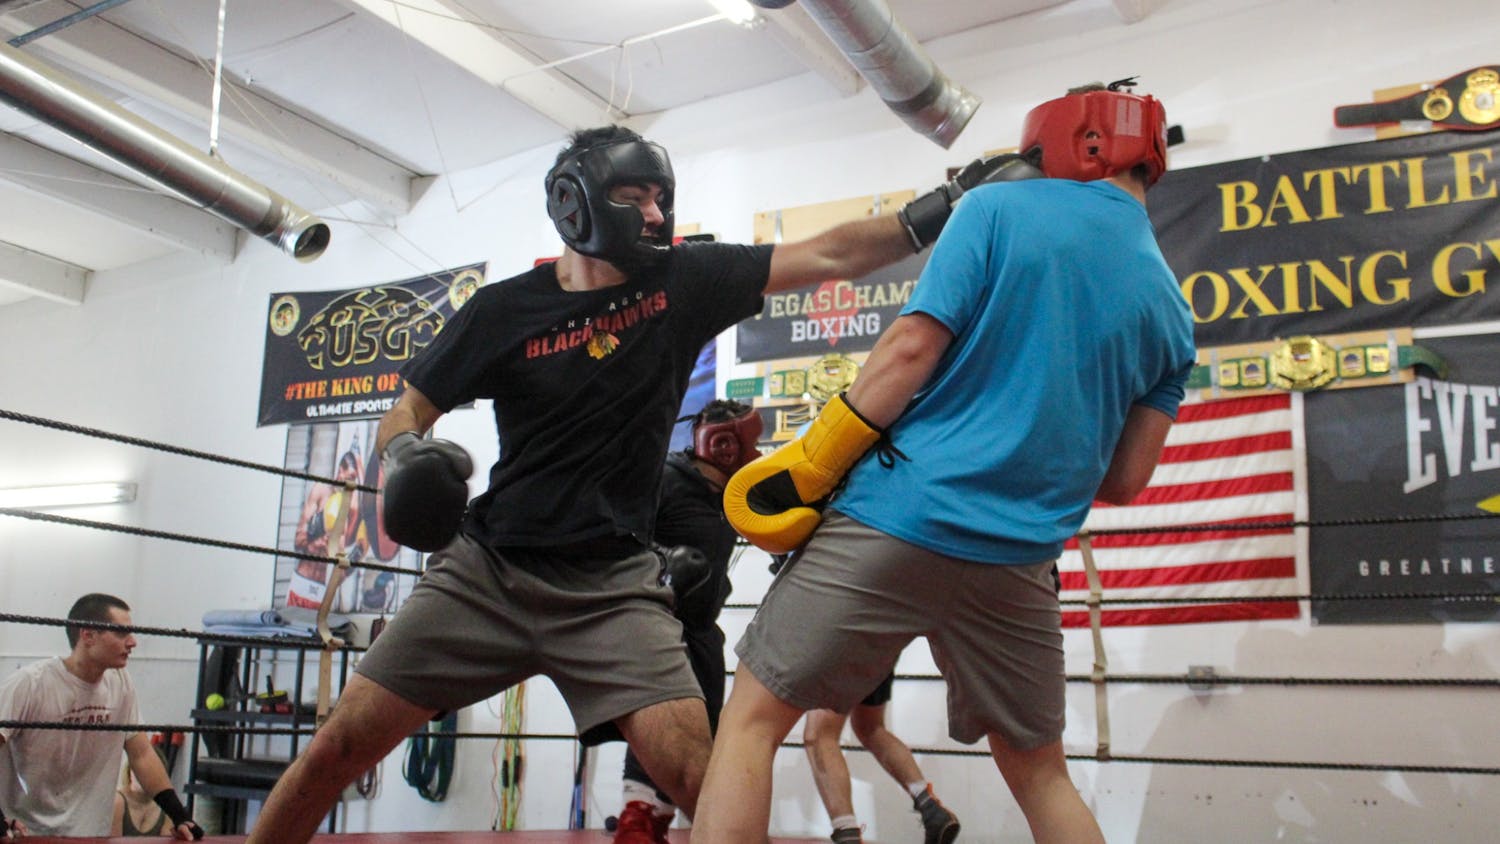 Members of the Carolina Boxing Club trade shots for an advantage in the ring during a sparring practice on Feb. 18, 2022. Boxing club practices include a variety of workouts focusing around cardio, combo training and strength training.